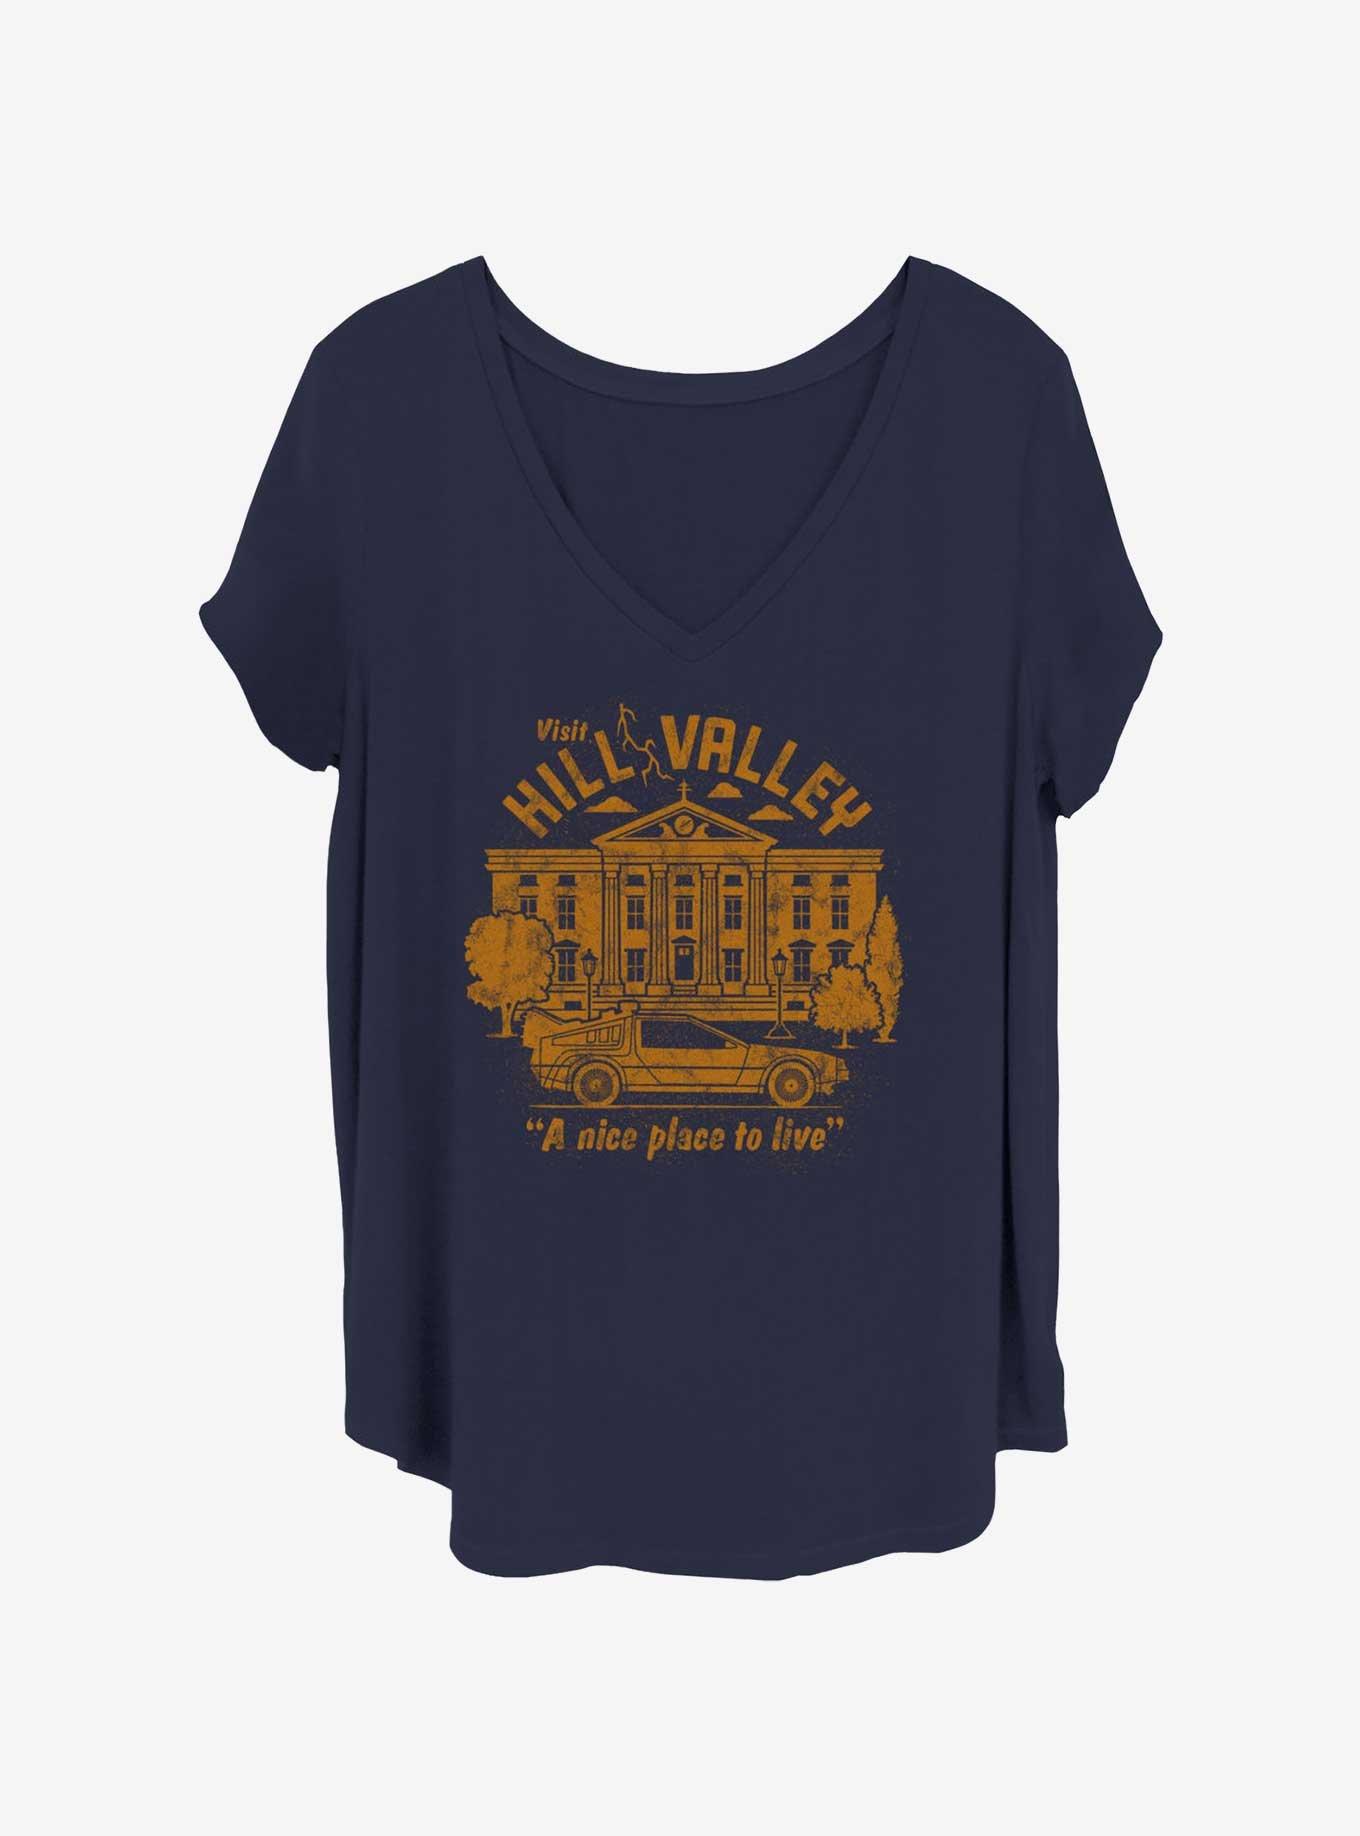 Back to the Future Visit Hill Valley Girls T-Shirt Plus Size, NAVY, hi-res